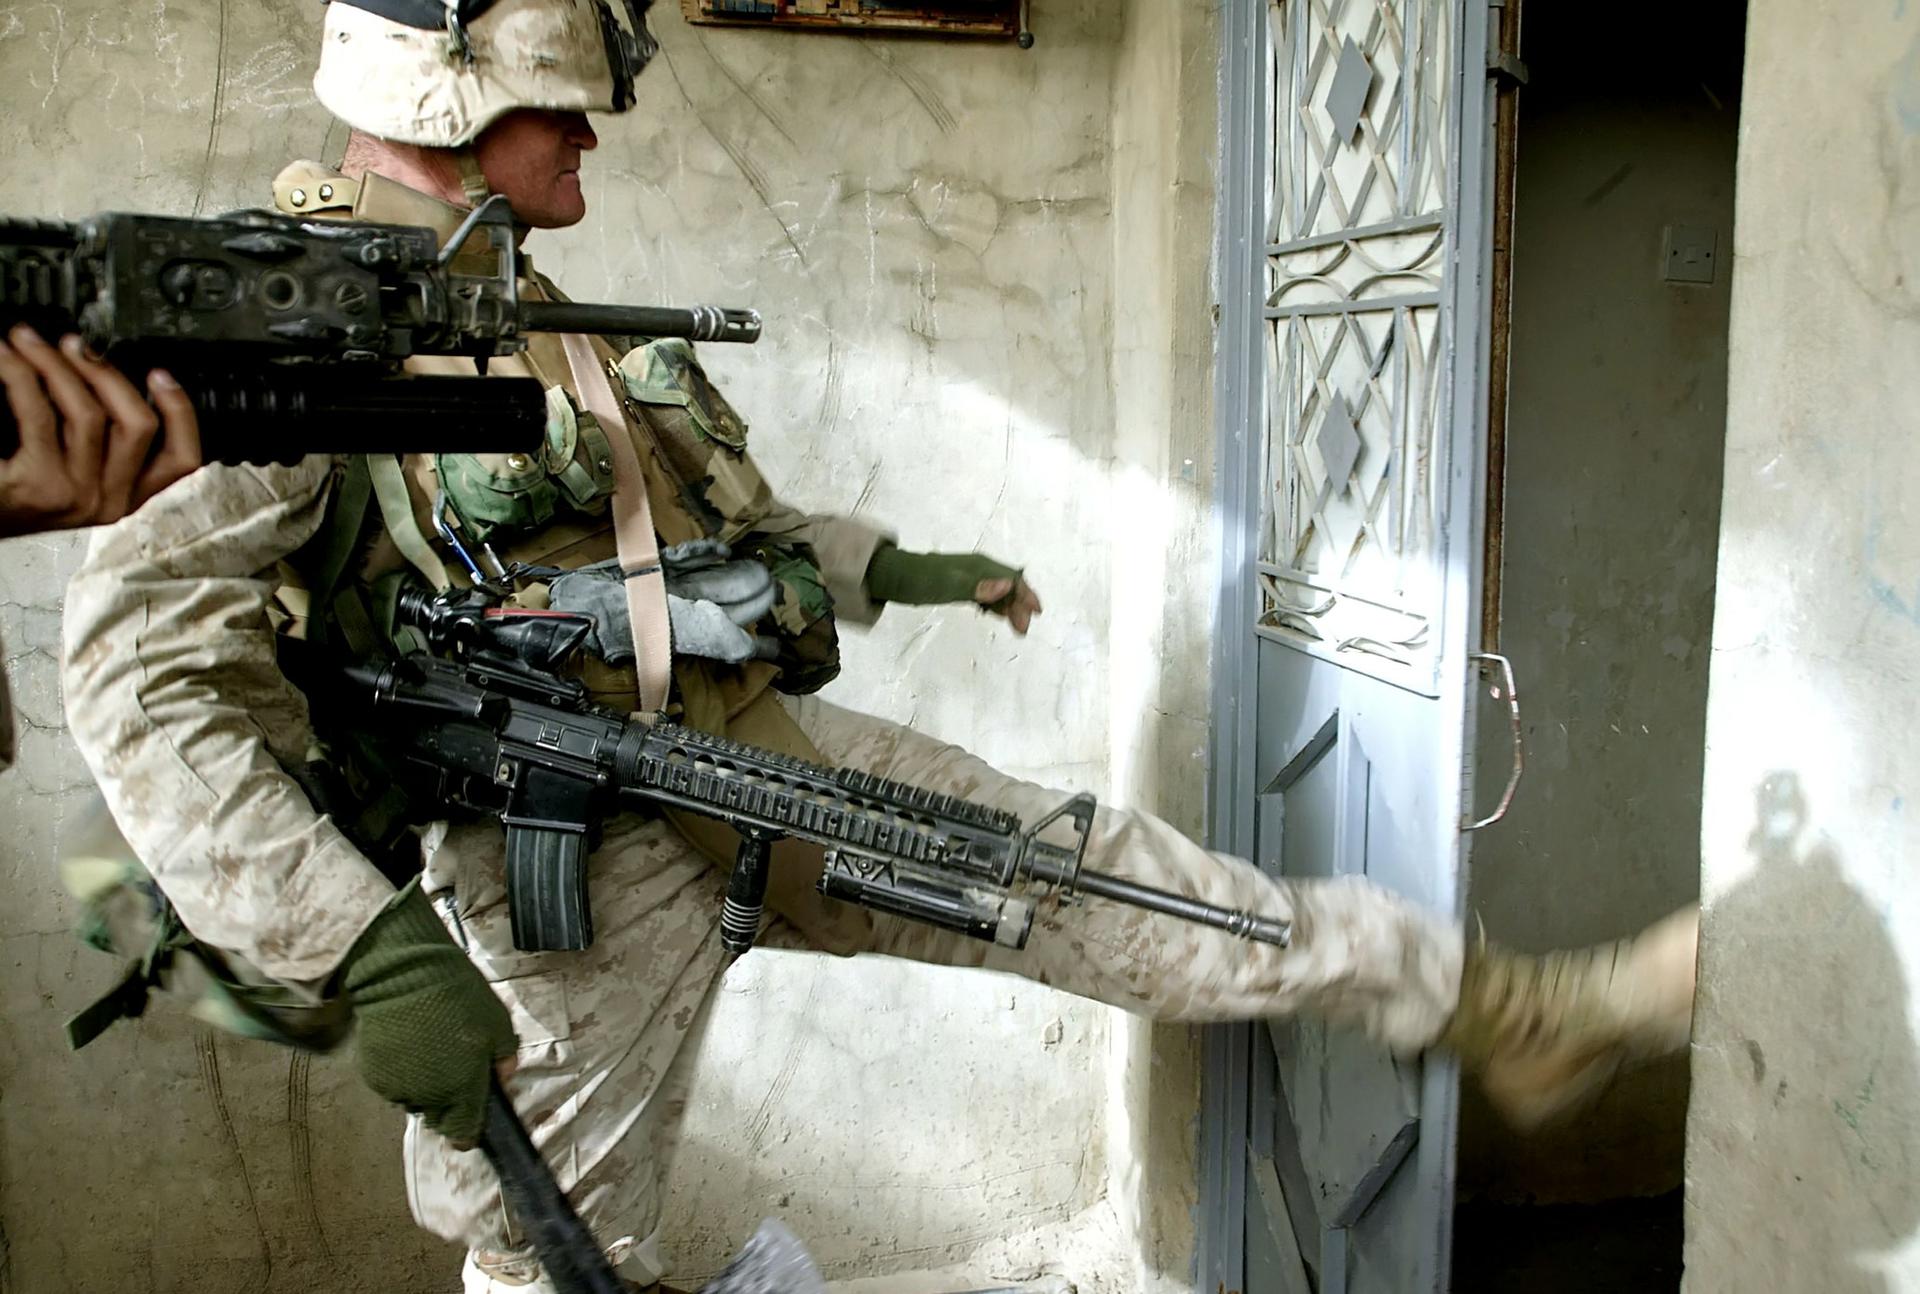 U.S. Marine Lance Corporal Michael Oliver Ray, on a search operation in Fallujah, Iraq in December 2004. An American offensive at the time came to be known as "The Second Battle of Fallujah." 